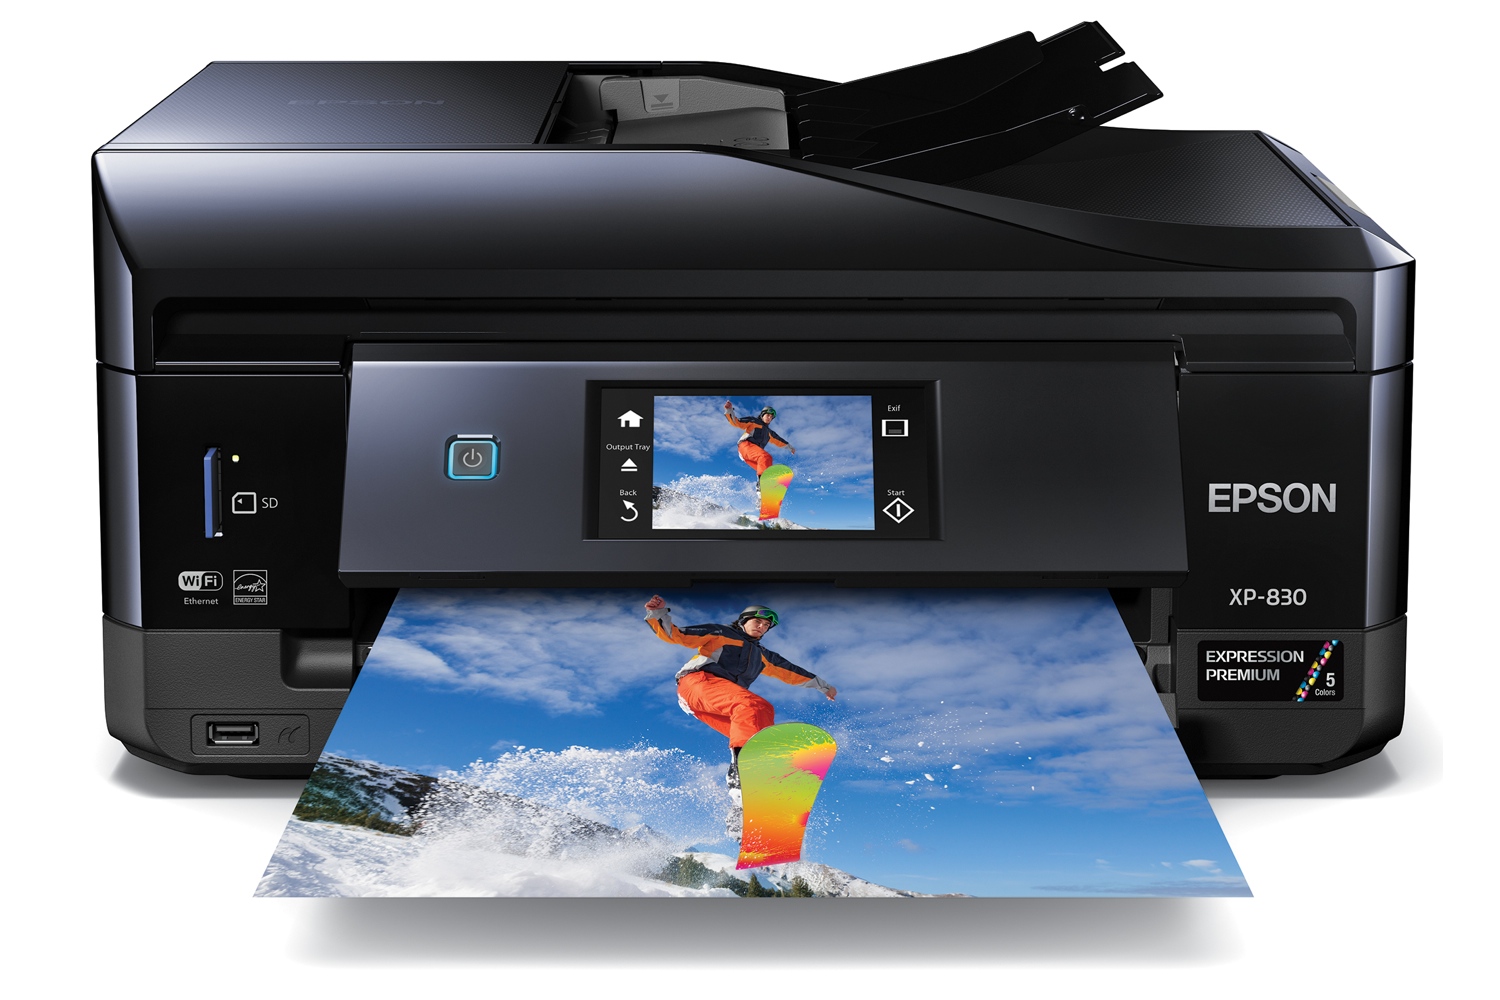 epsons updated expression home photo printers include wide format model epson xp 830 head on